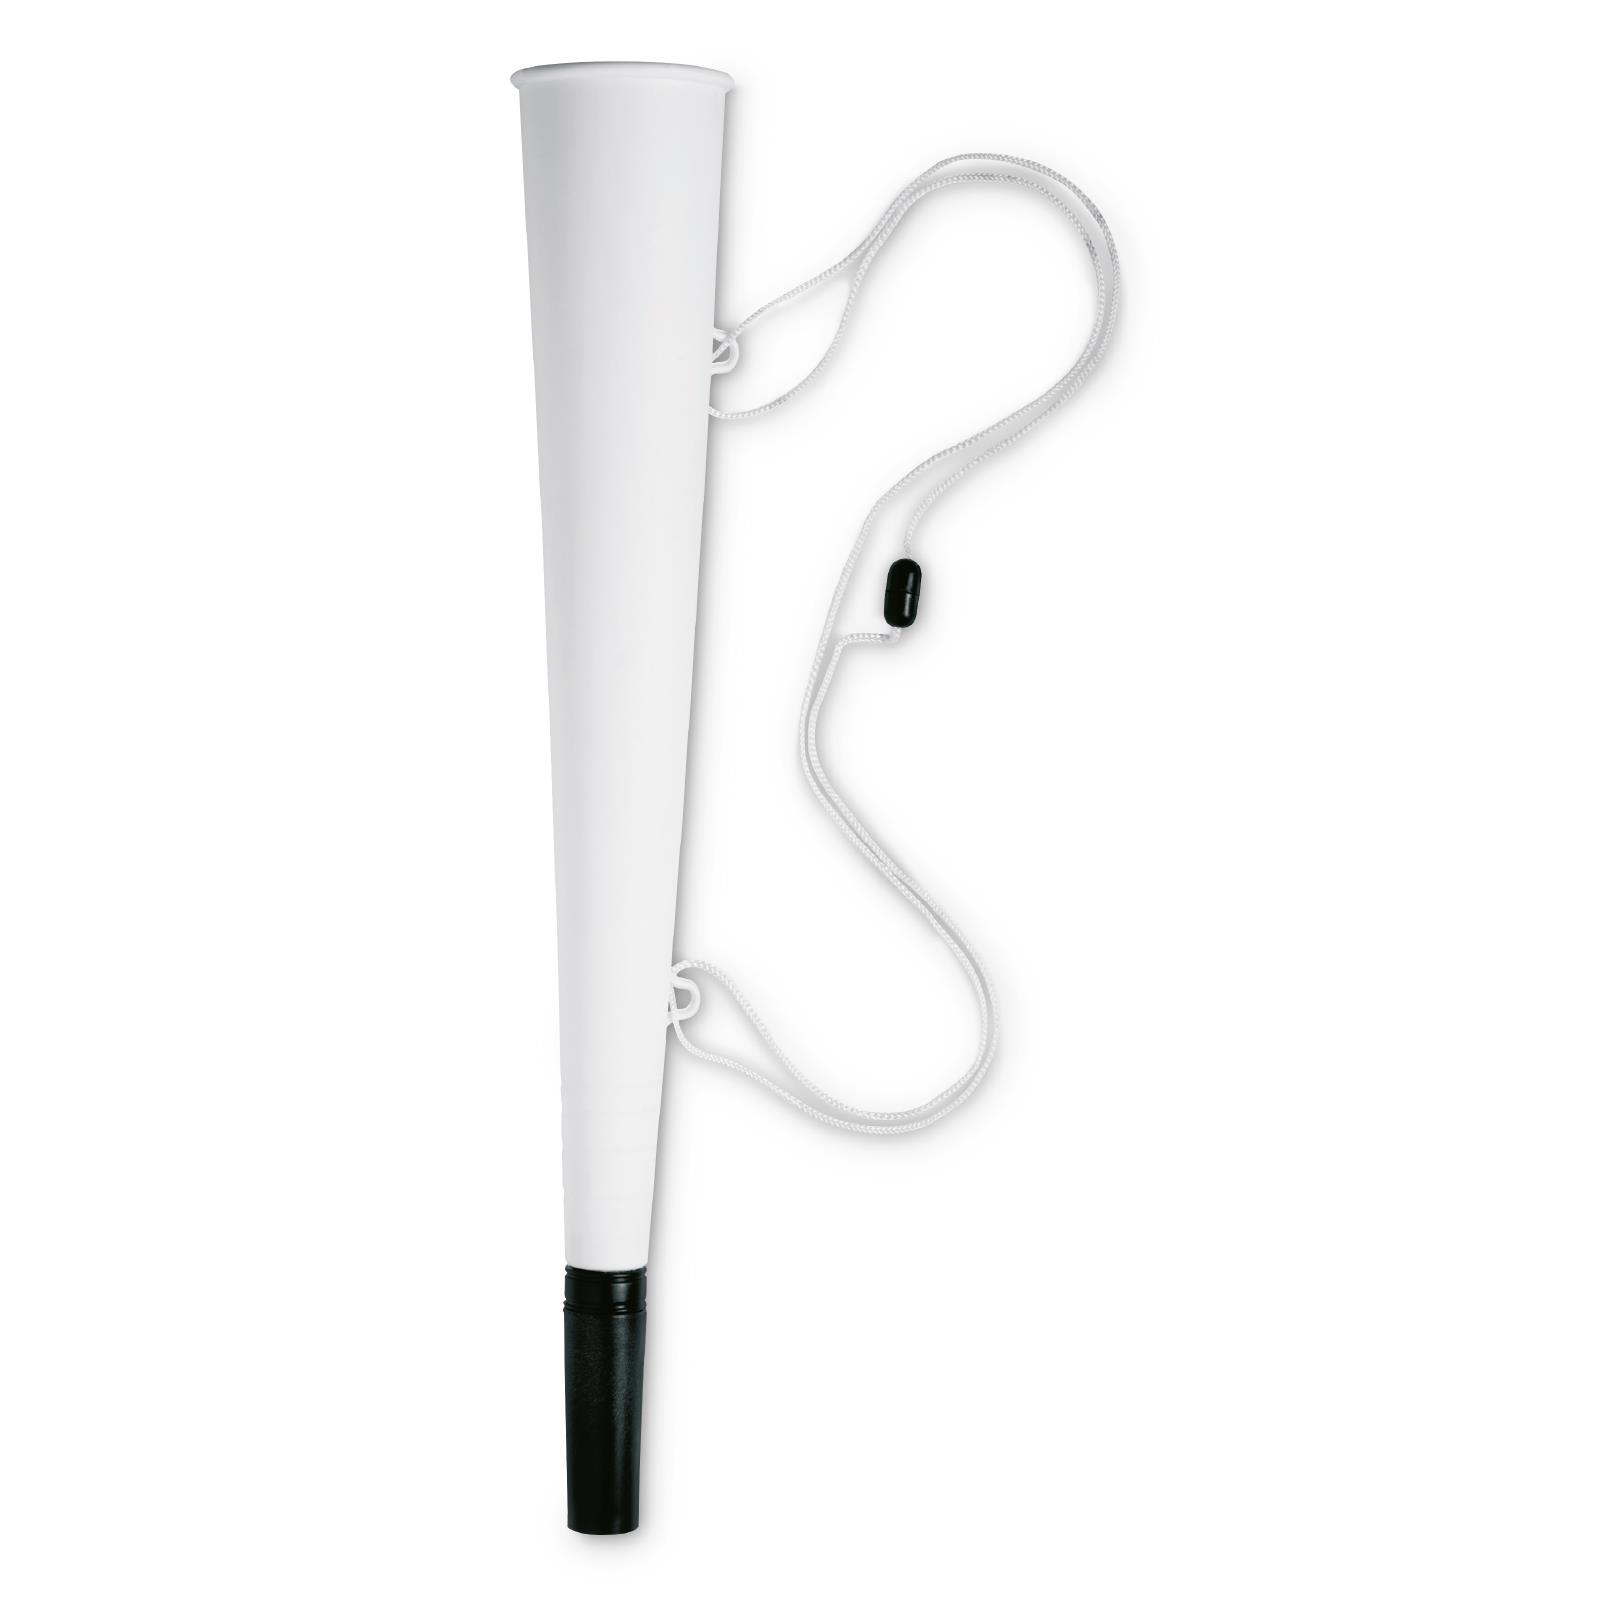 Promotional Stadium horn with cord         